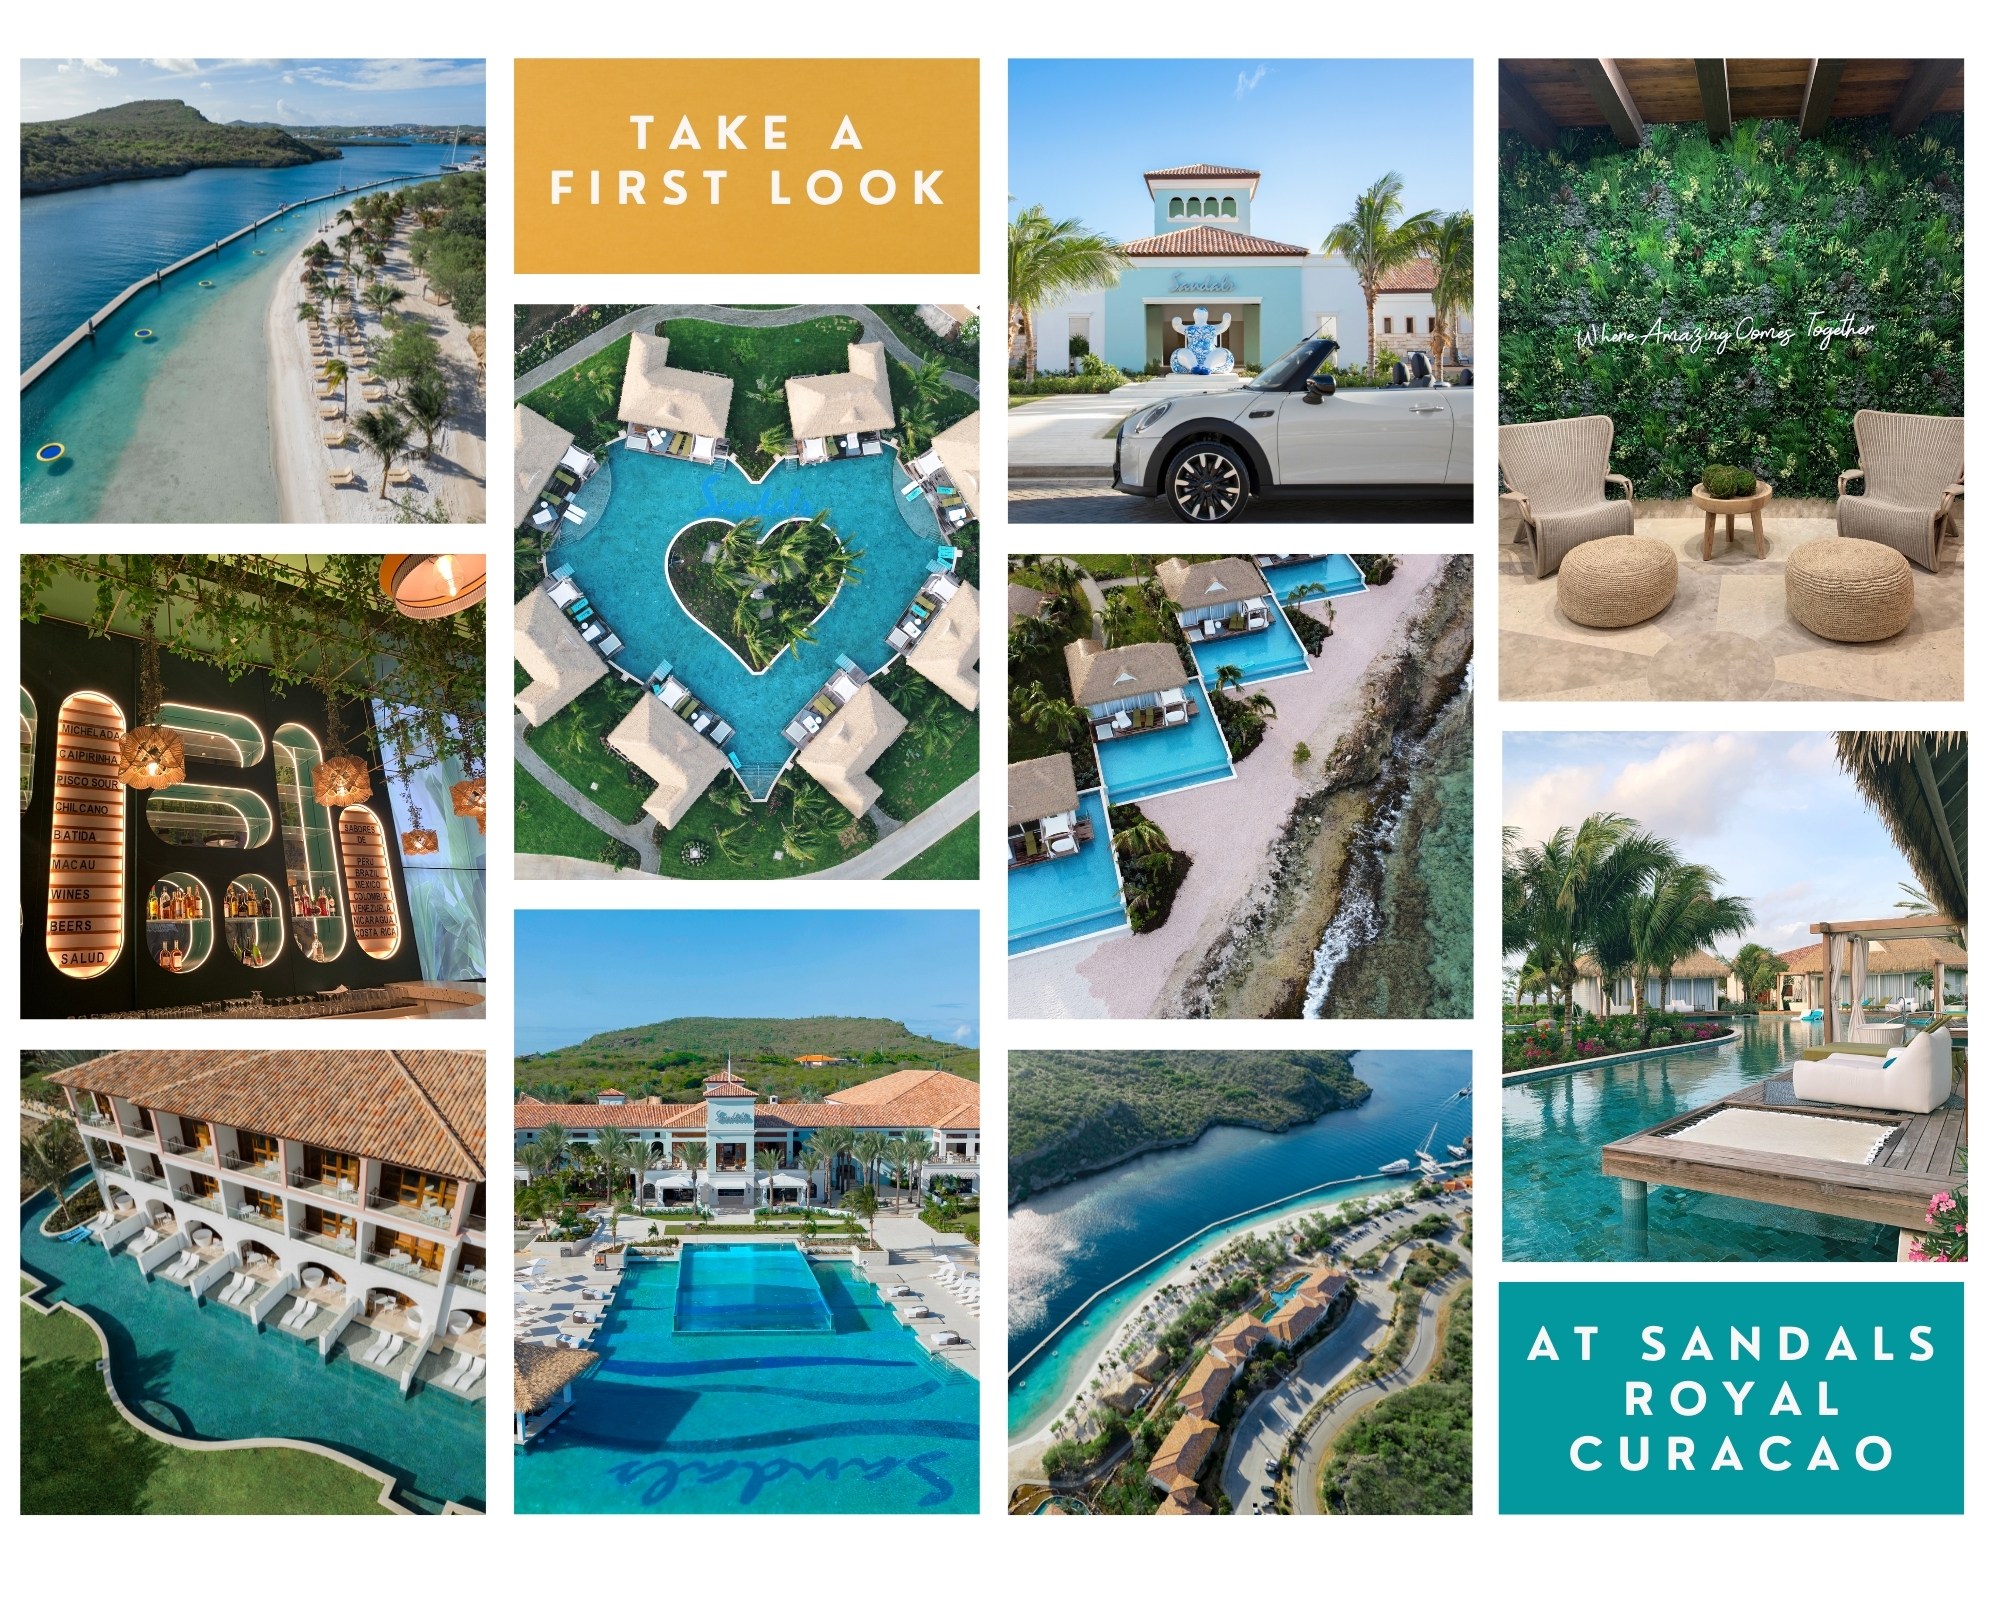 A First Look At Sandals Royal Curacao